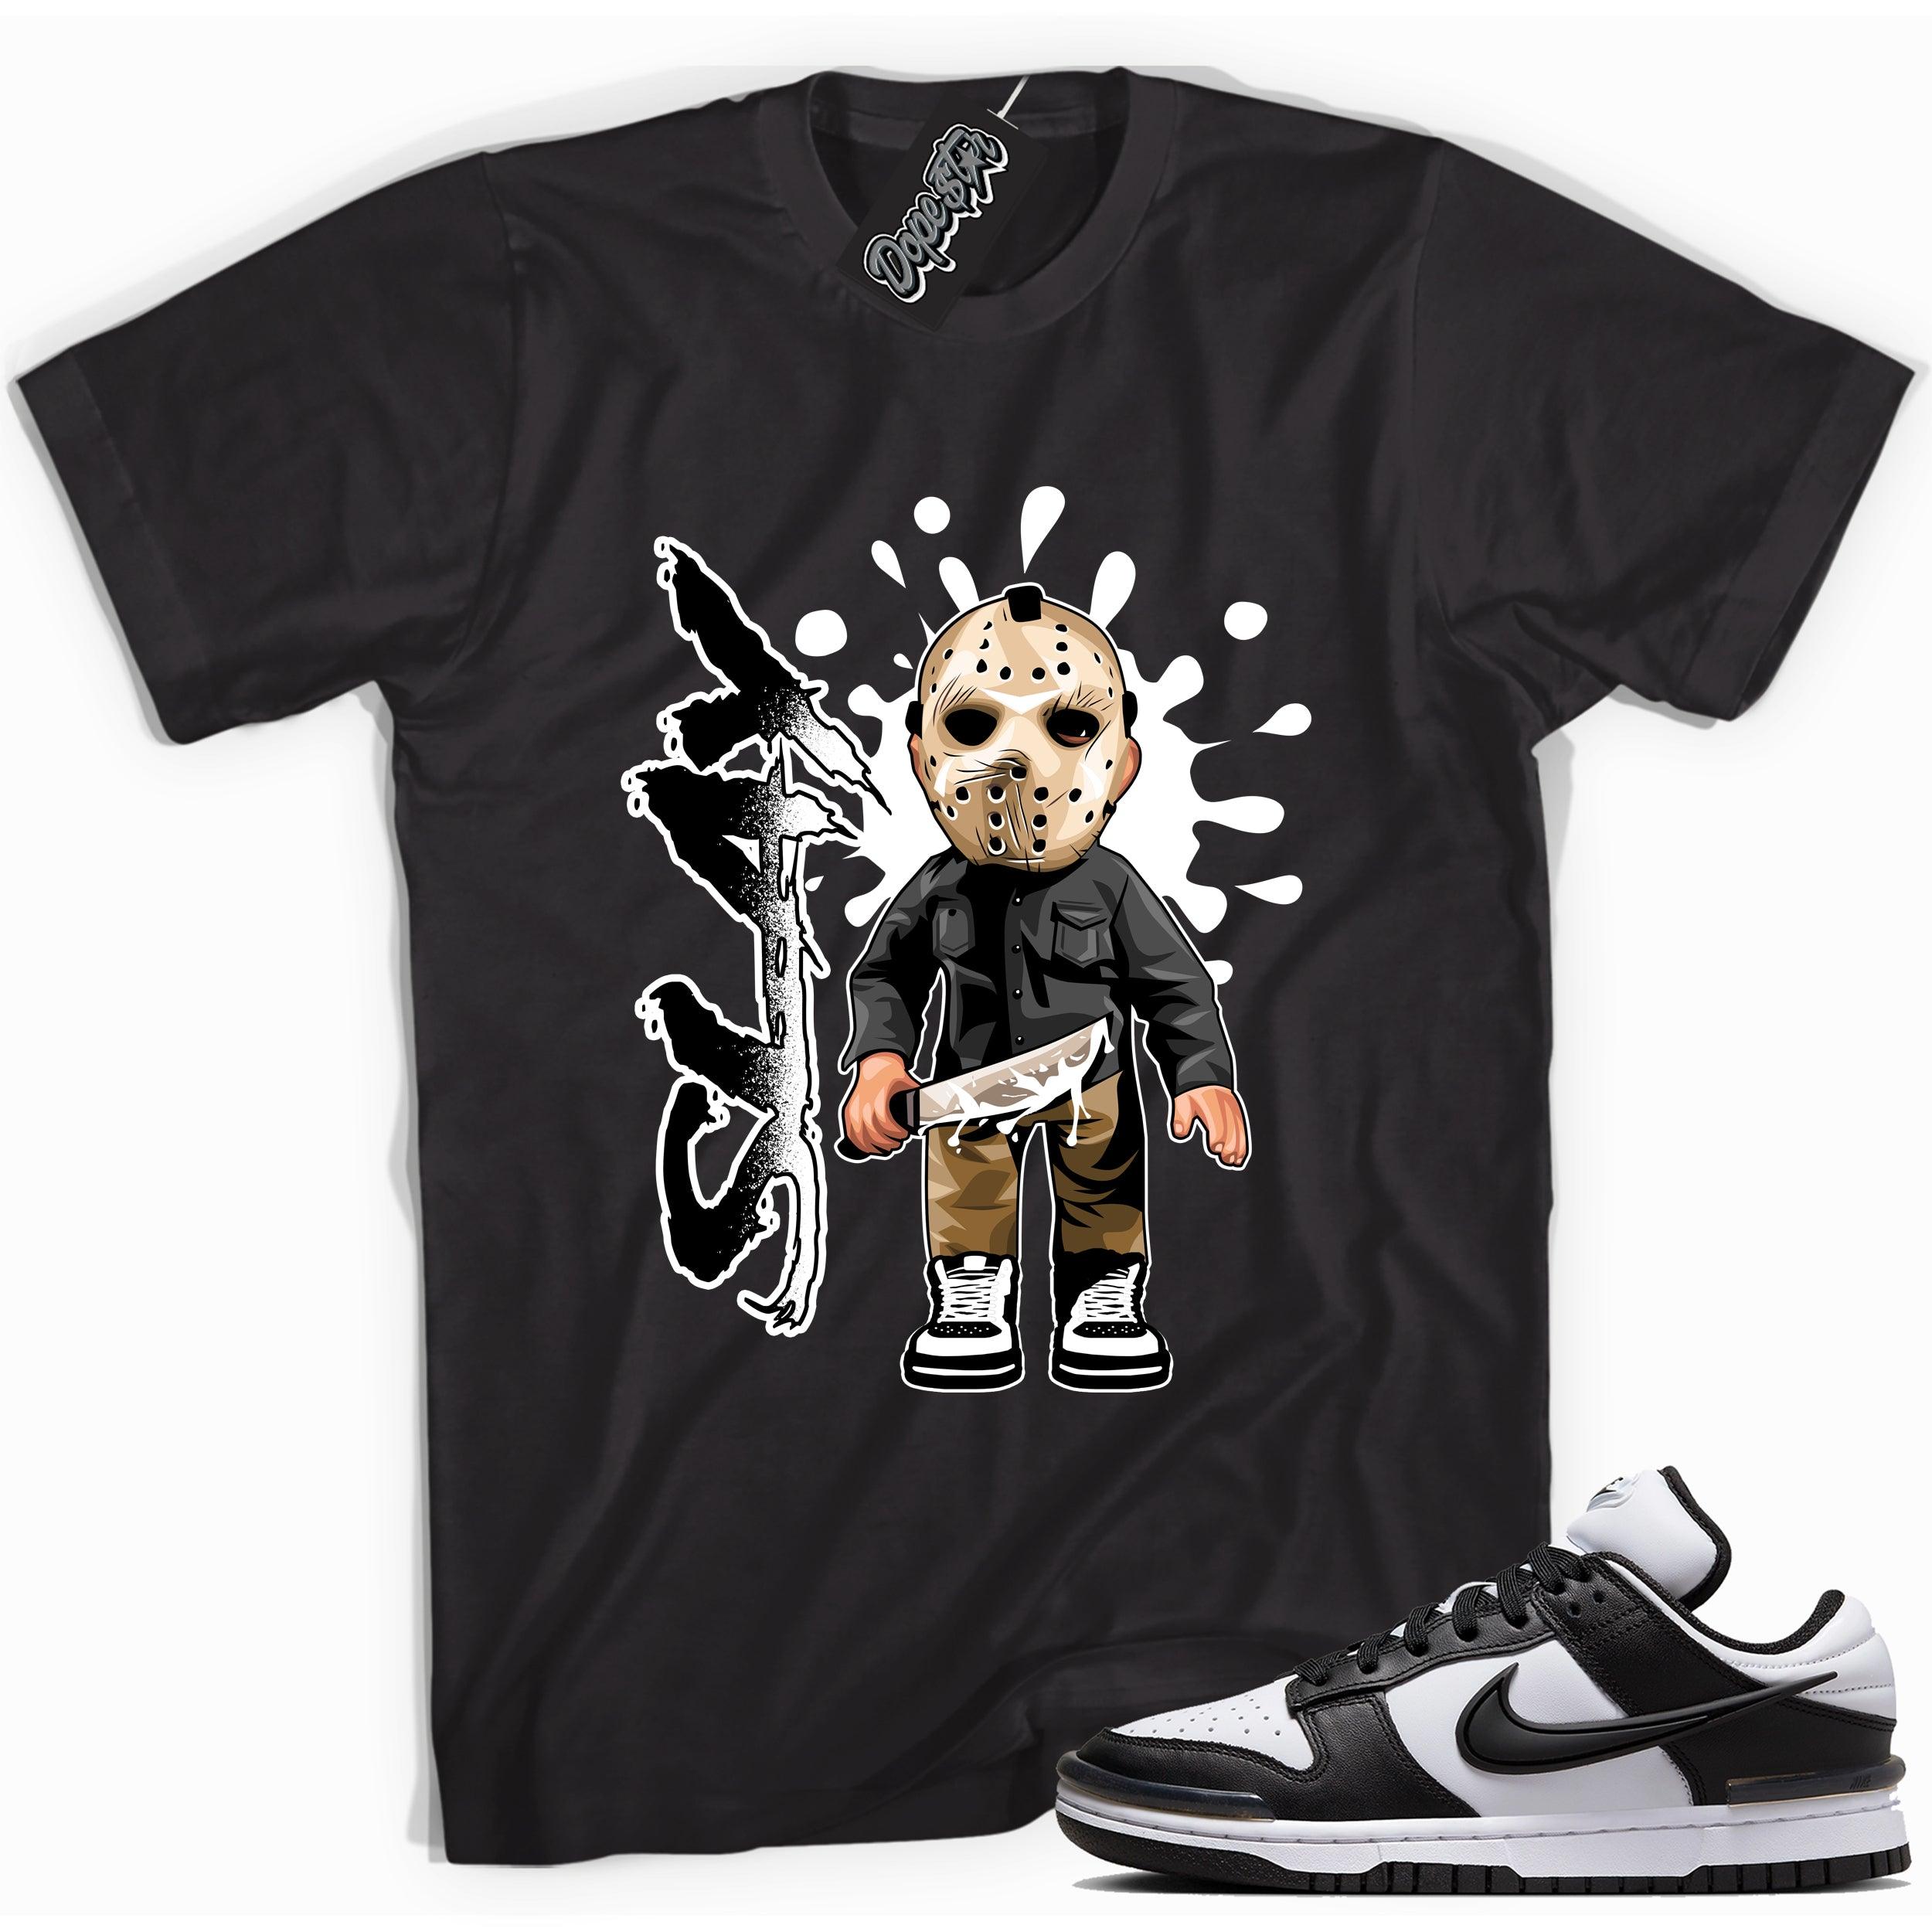 Cool black graphic tee with 'slay' print, that perfectly matches Nike Dunk Low Twist Panda sneakers.